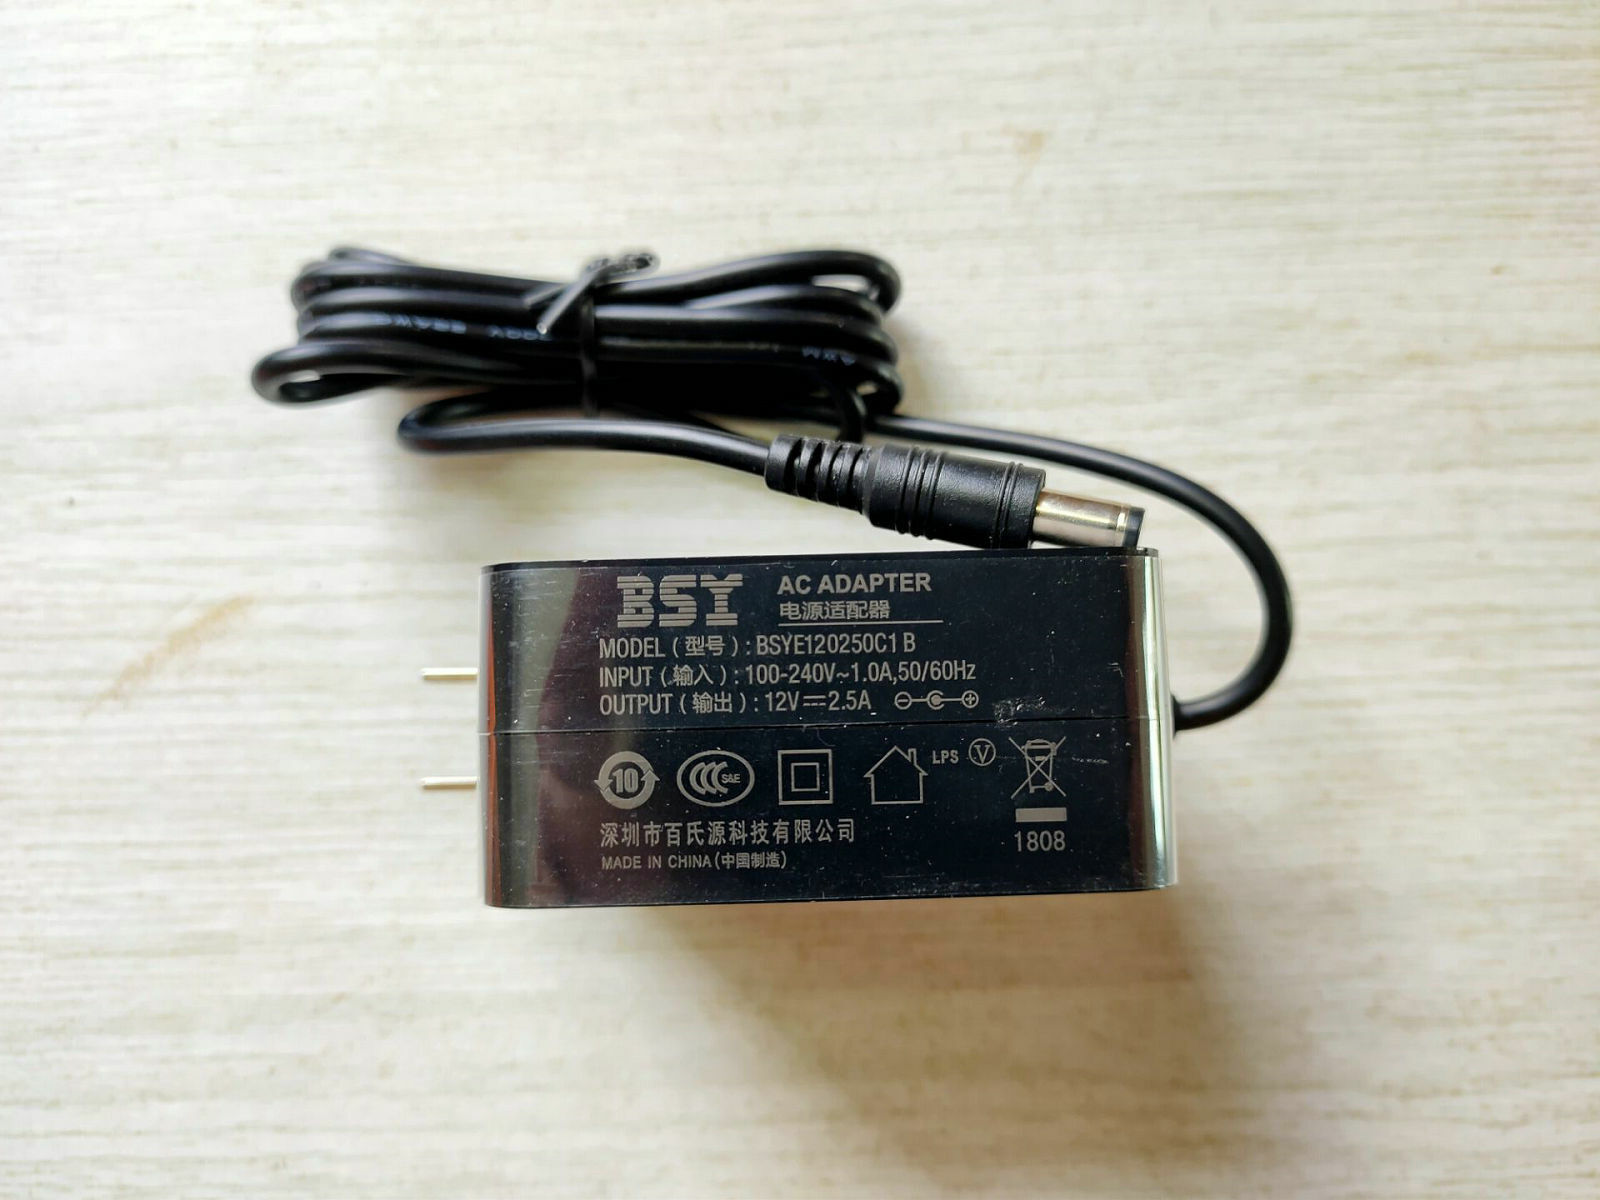 1pcs New AC Adapter Power Charger For BSY BSYE120250C1B 12V 2.5A 1pcs New AC Adapter Power Charger For BSY BSYE120250C1 - Click Image to Close